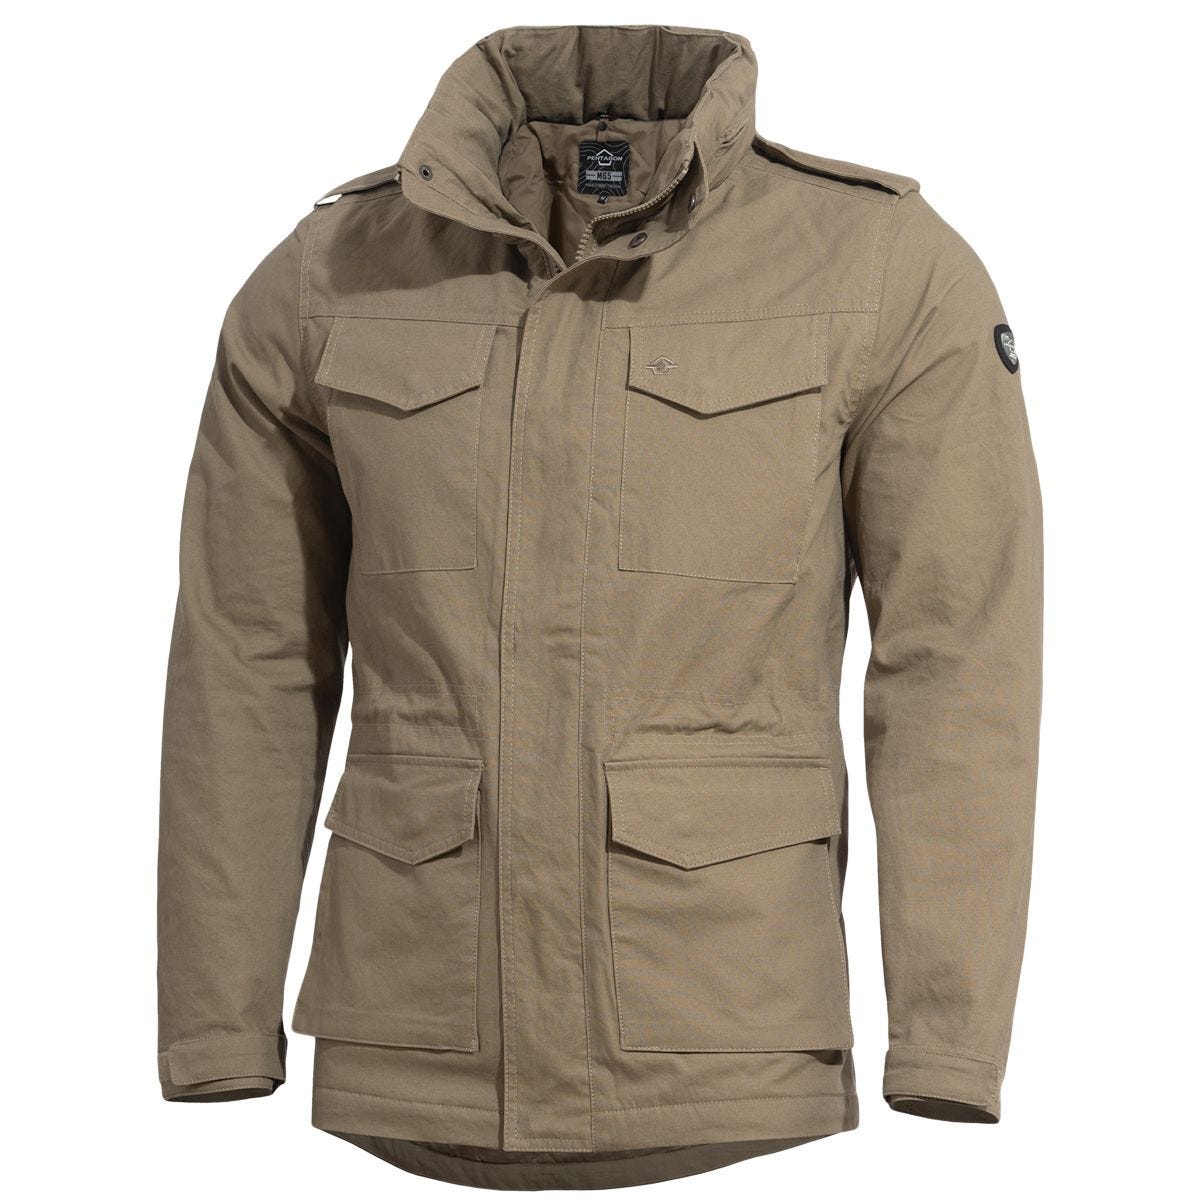 Sale - Clearance Sale Pentagon M65 2.0 Parka Coyote of exceptional quality